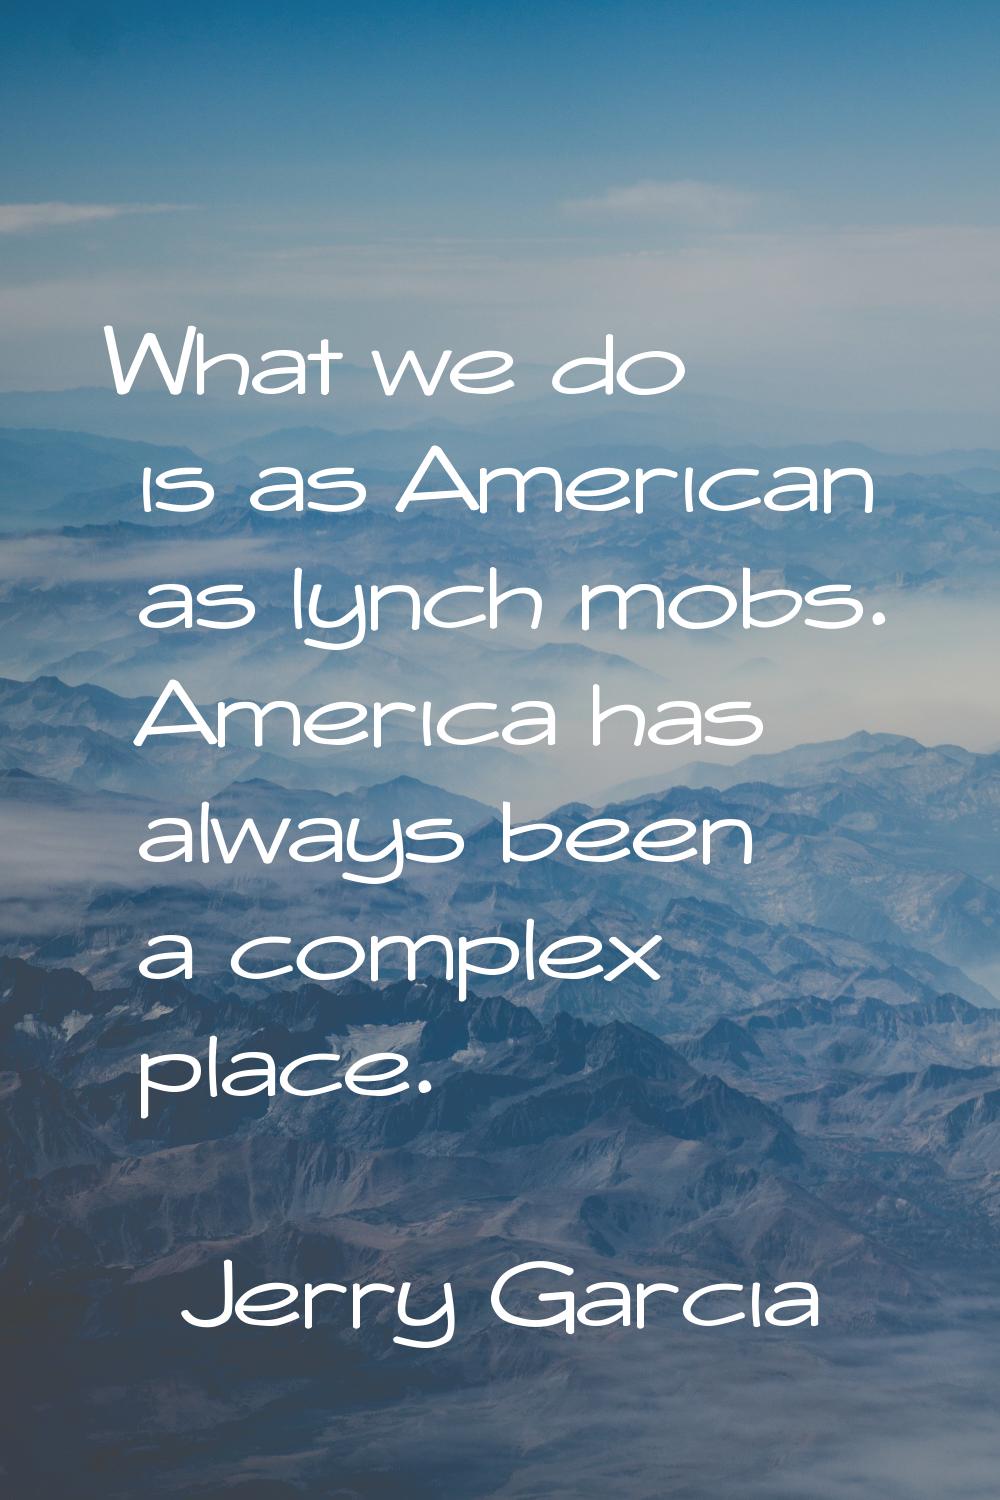 What we do is as American as lynch mobs. America has always been a complex place.